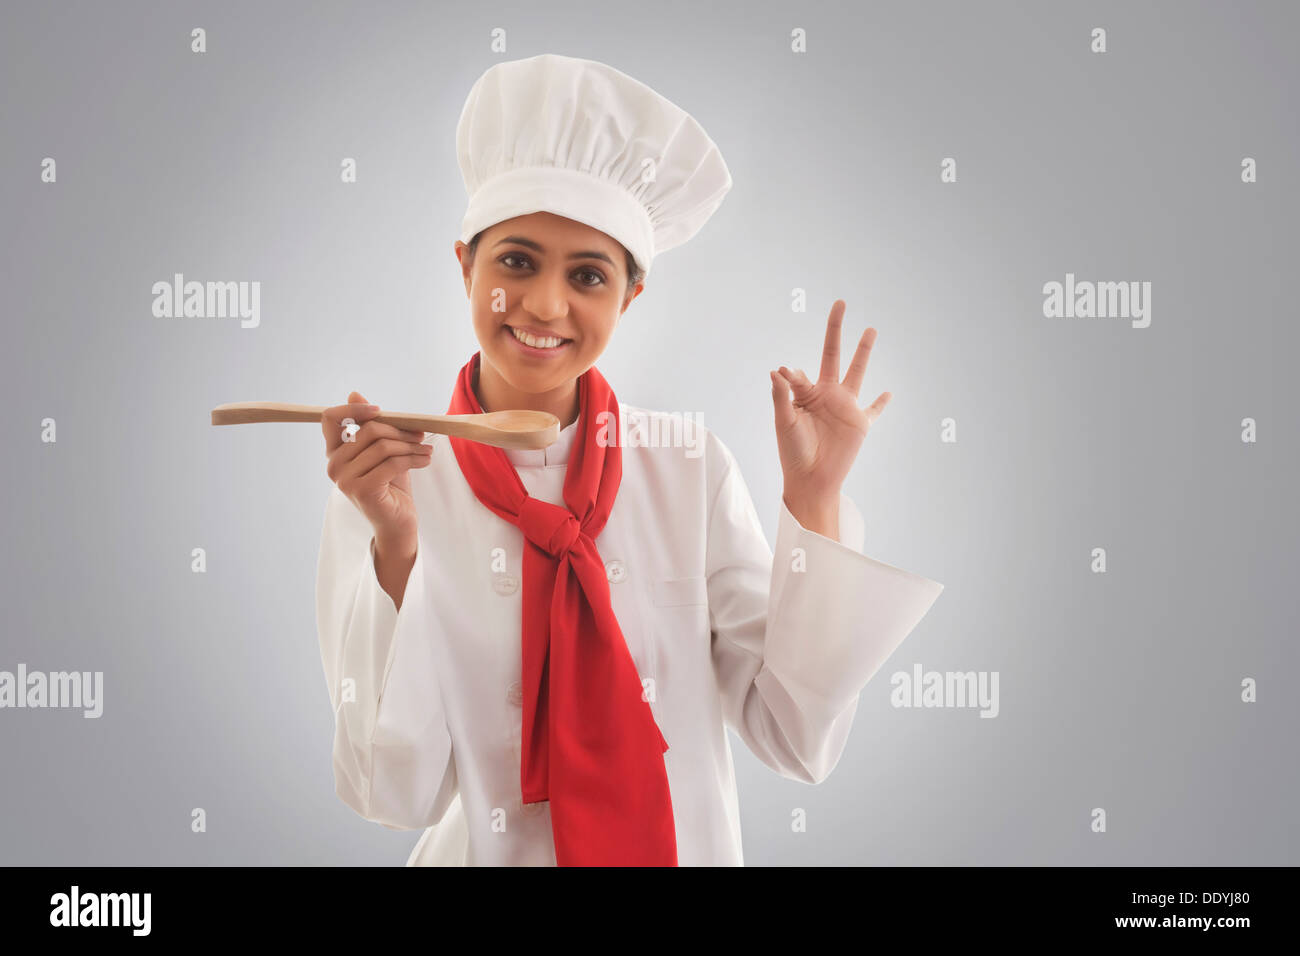 Portrait of young female chef gesturing ok sign Stock Photo